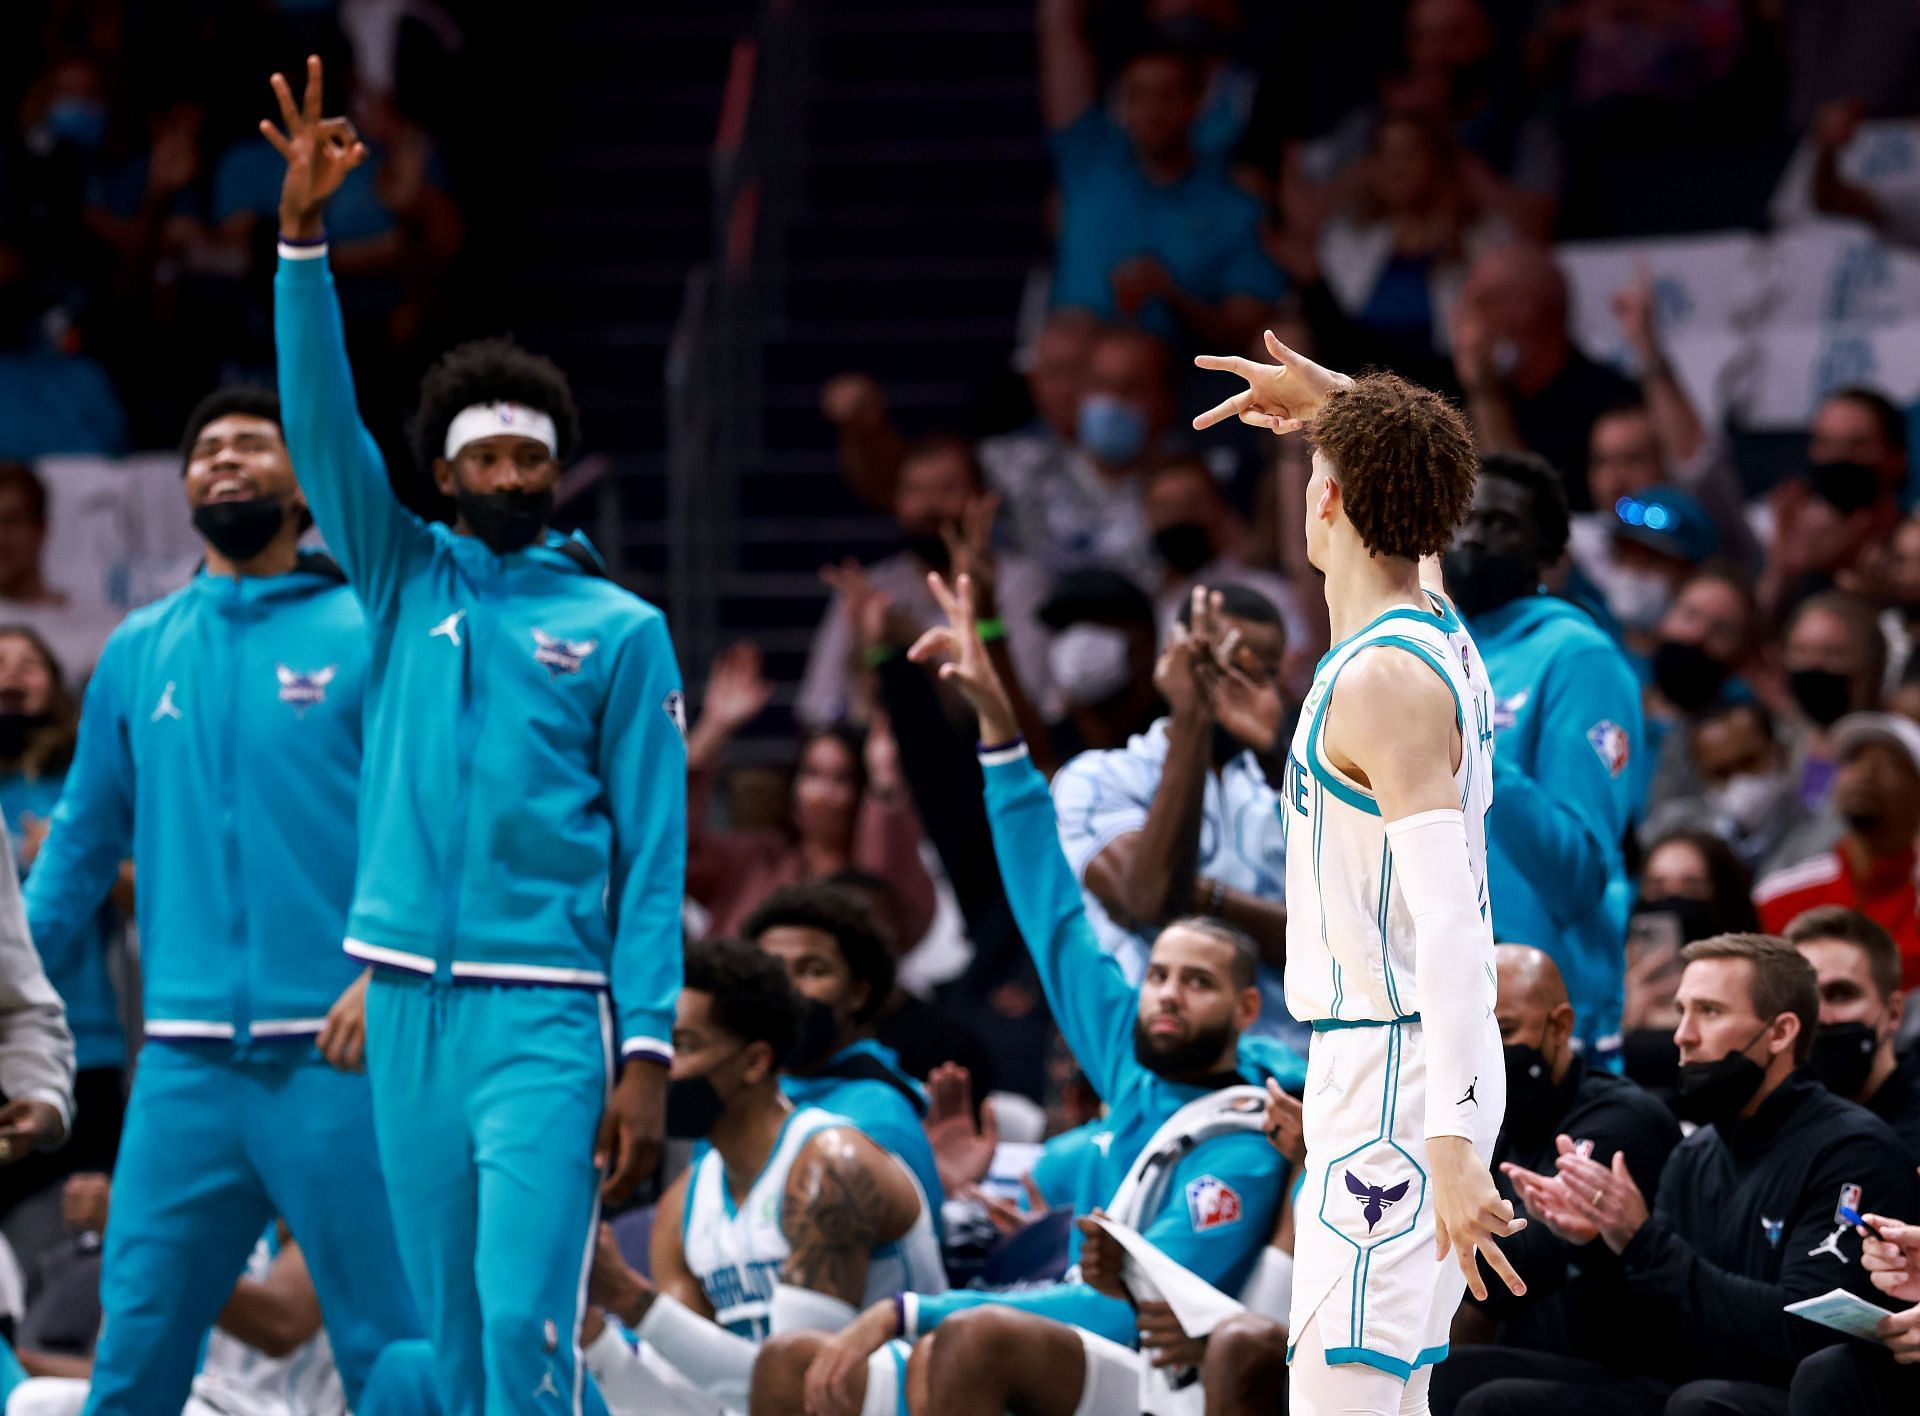 Charlotte Hornets bench celebrates a three-pointer by LaMelo Ball in a game